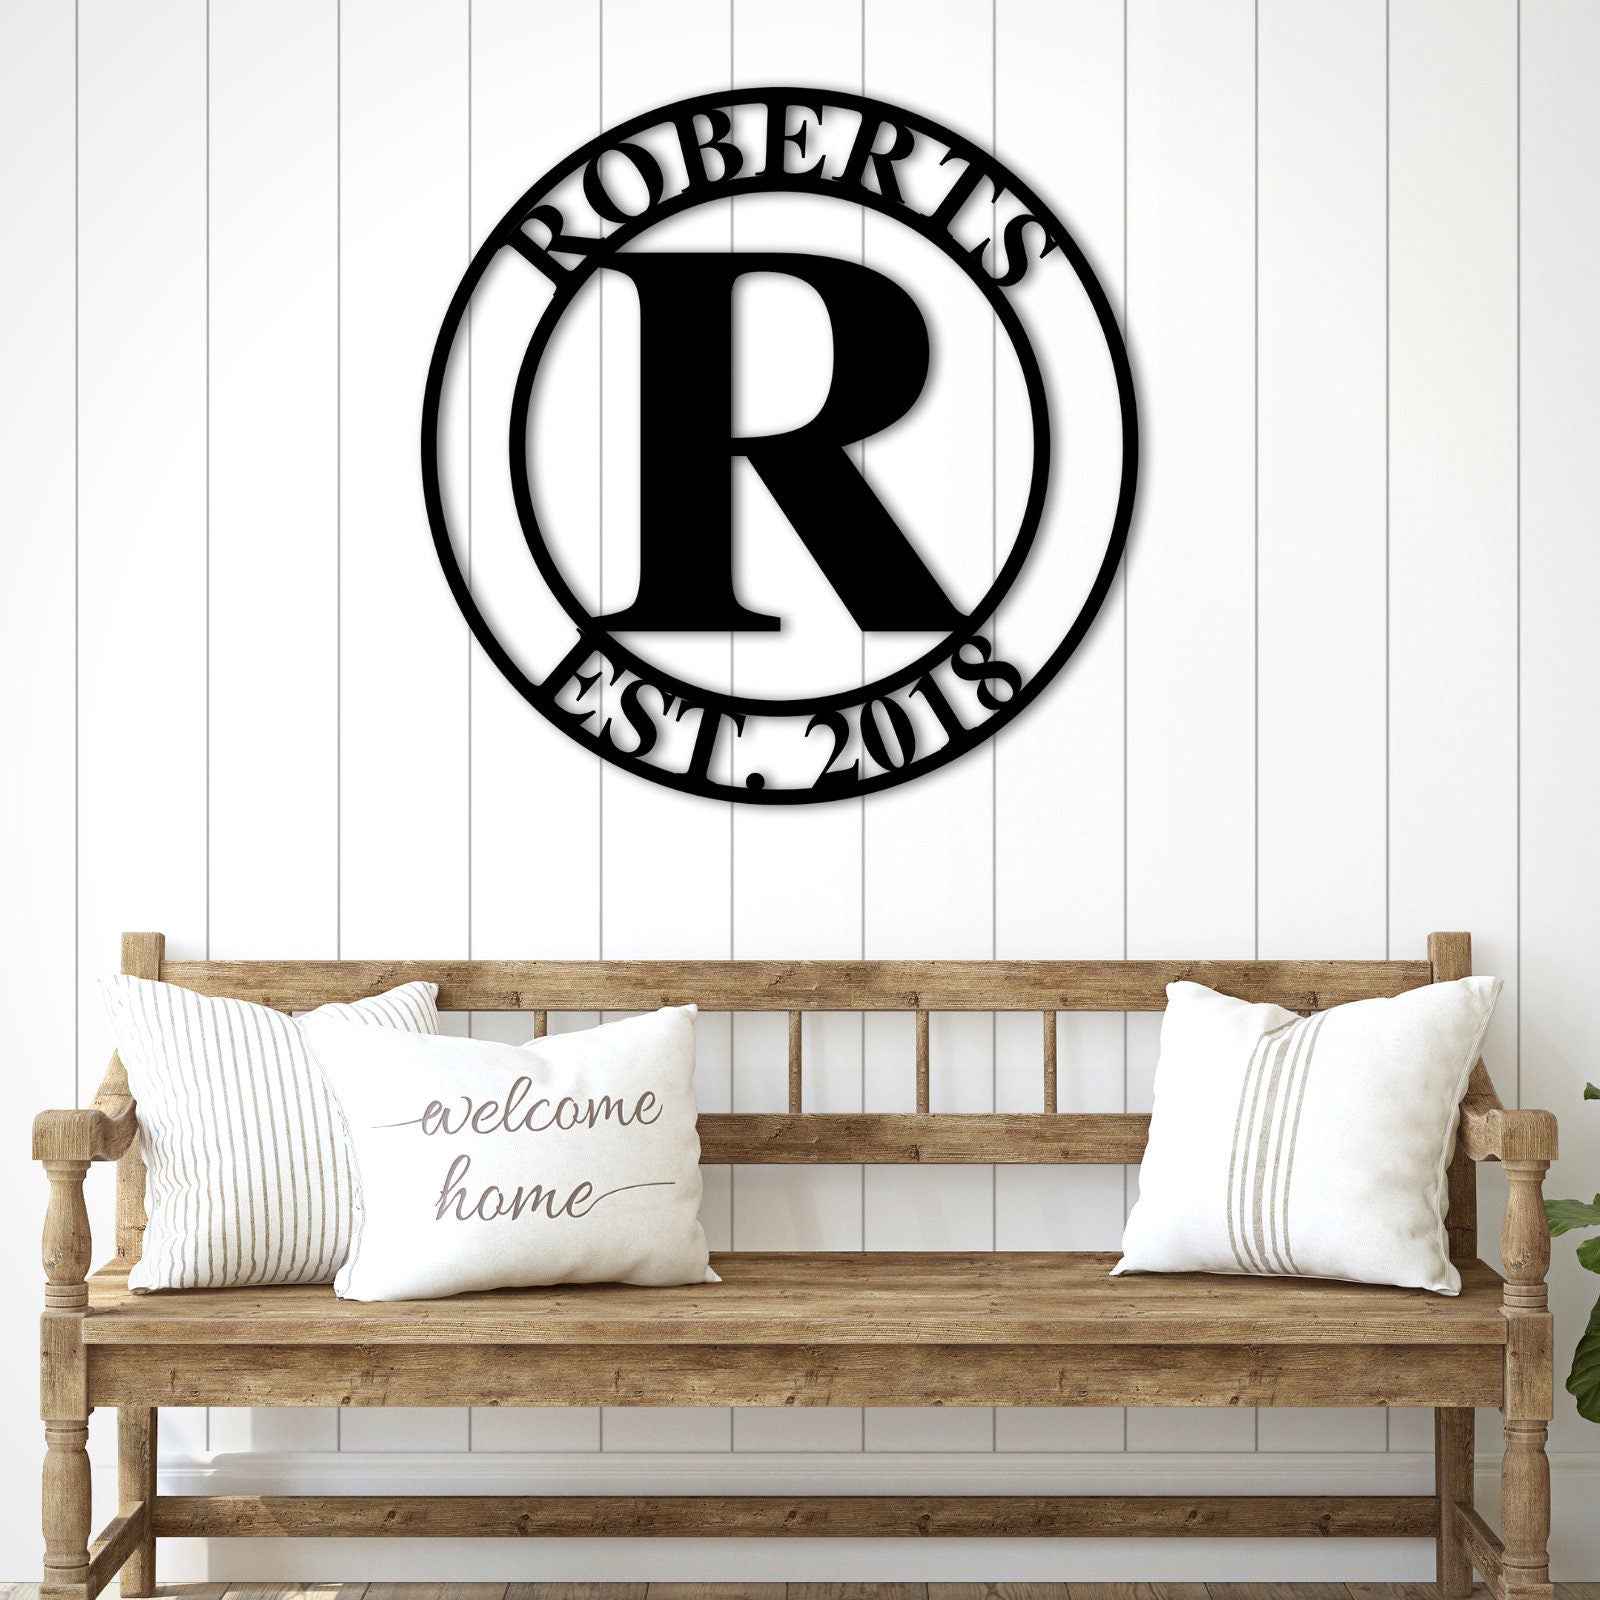 Personalized Family Name Metal Sign